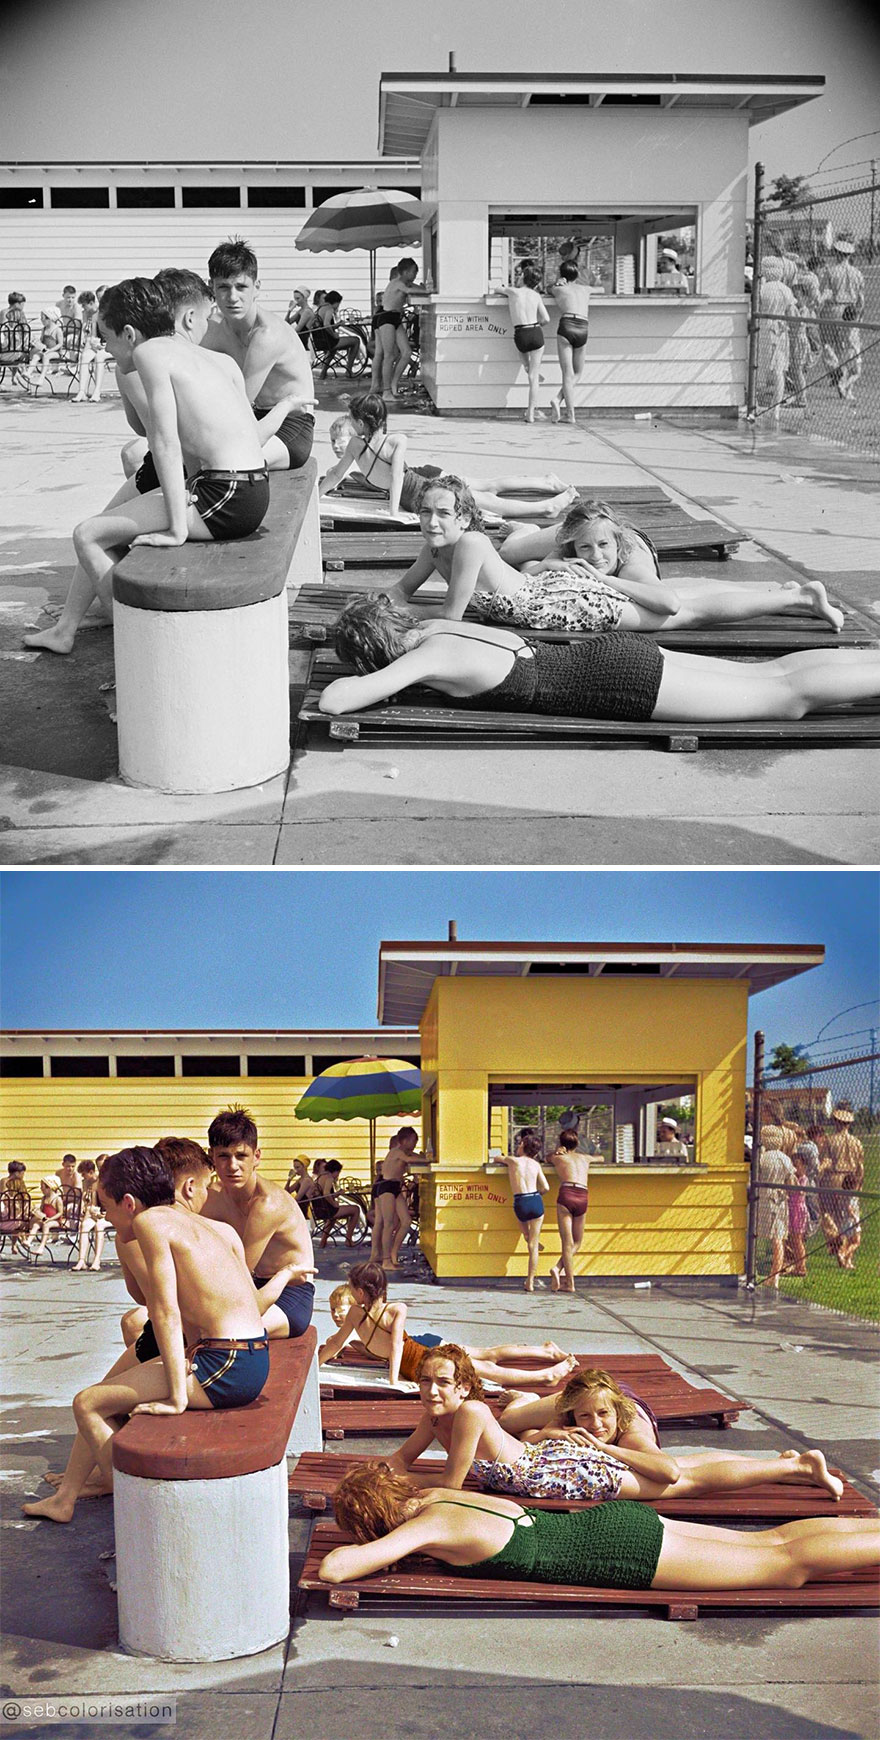 Sunbathers At The Swimming Pool, Greenbelt, Maryland. Photographed By Marjory Collins In June 1942